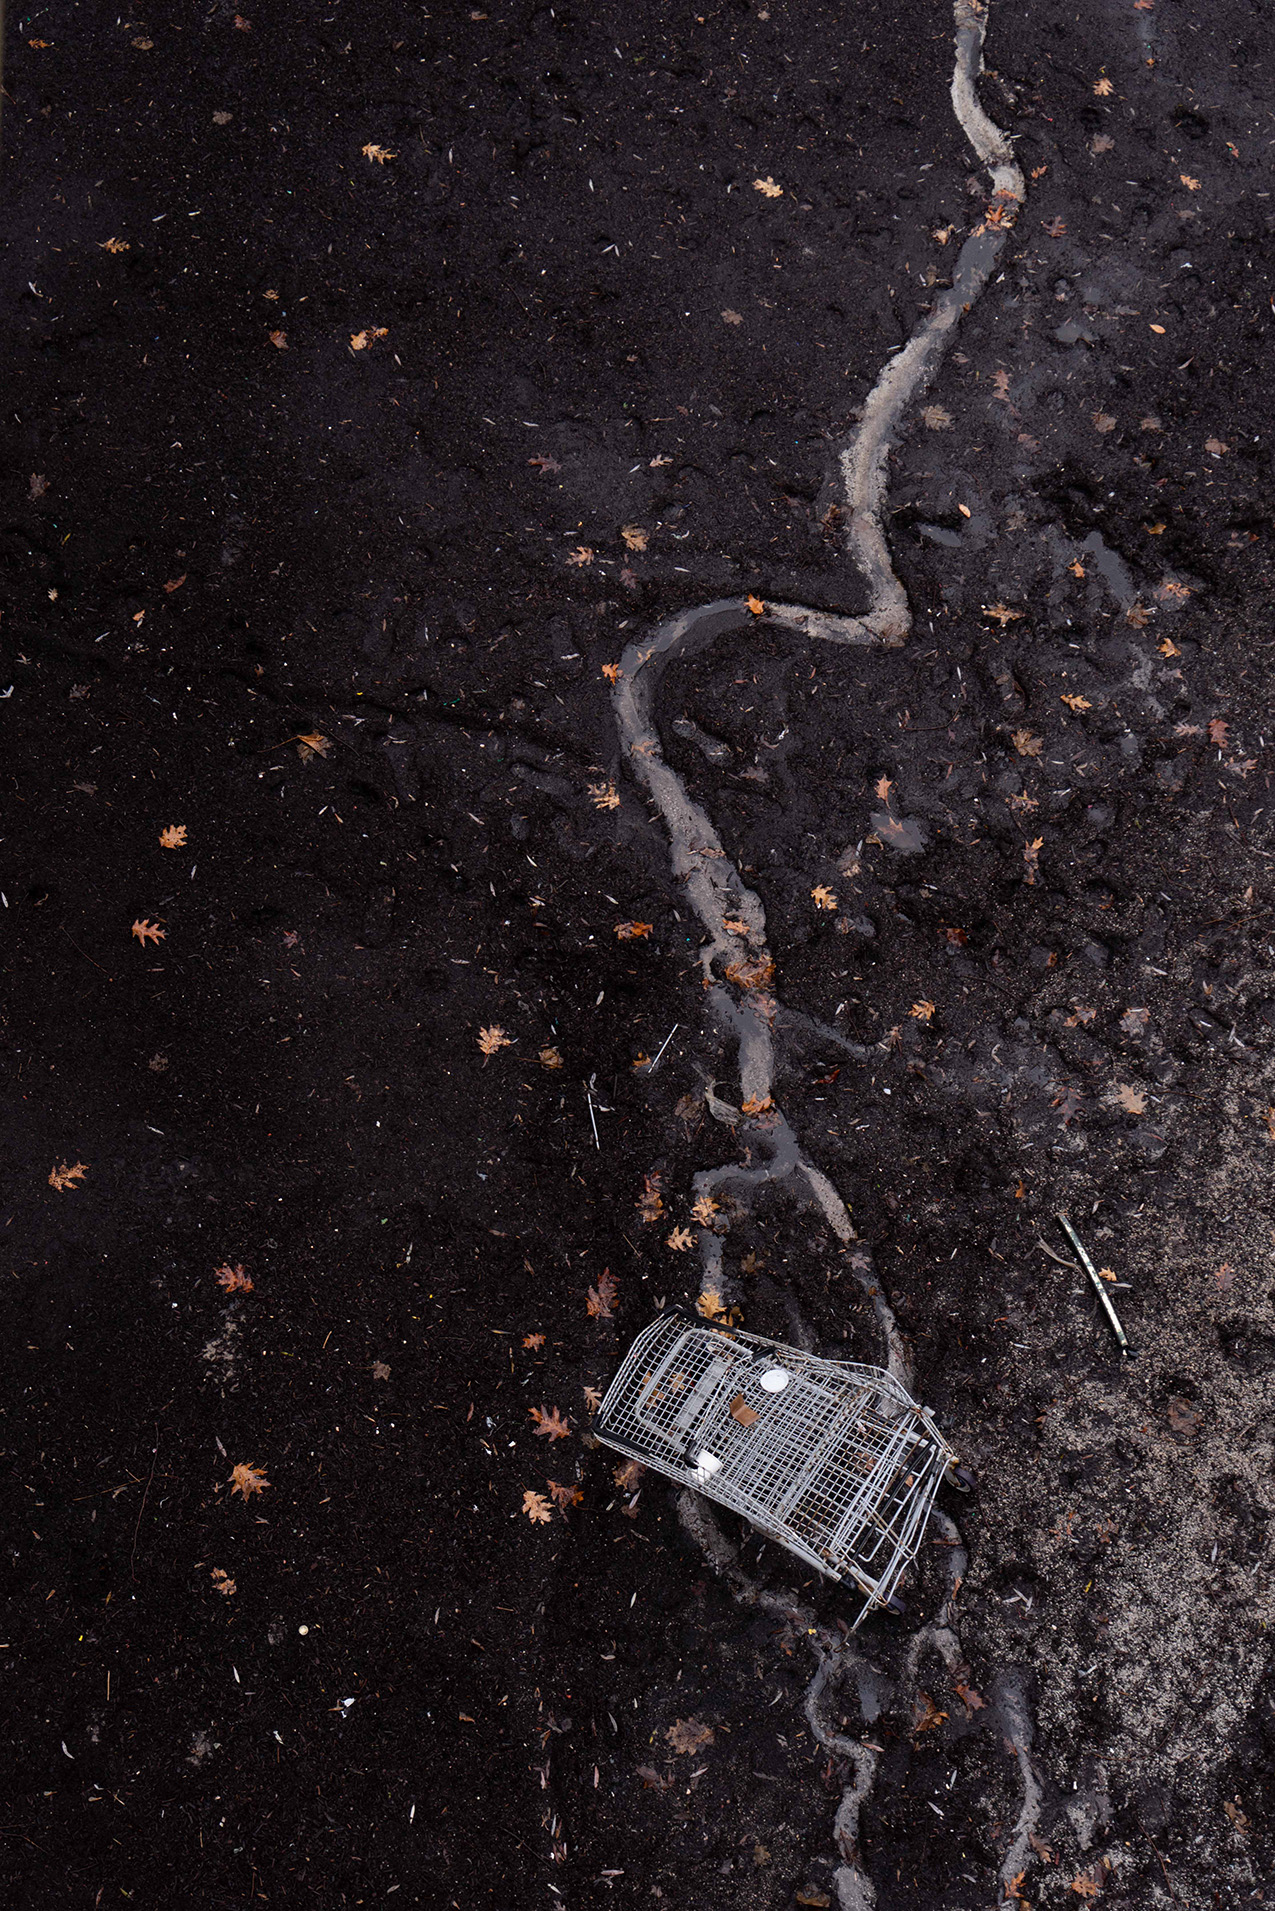 a photo looking down from above at a discarded shopping cart in an almost-black ravine bottom where fallen oak leaves dot the ground. a thin rivulet snakes through the image from the top to bottom.